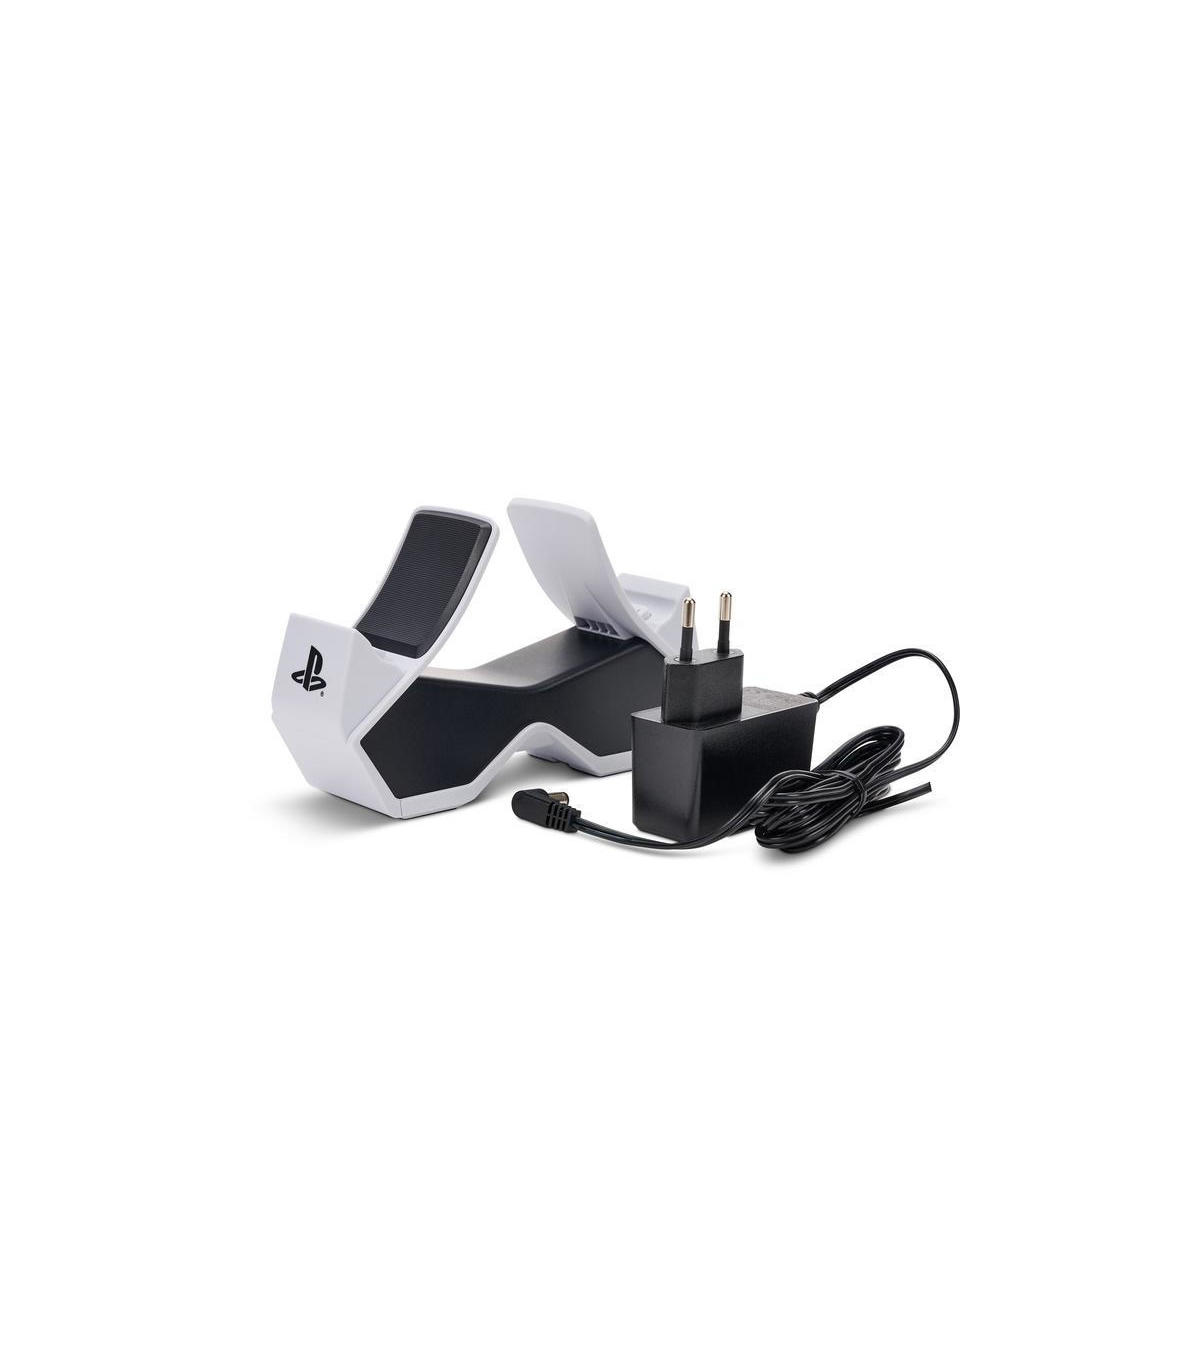 Twin Charging Station Dualsense Controller Ps5 Power A